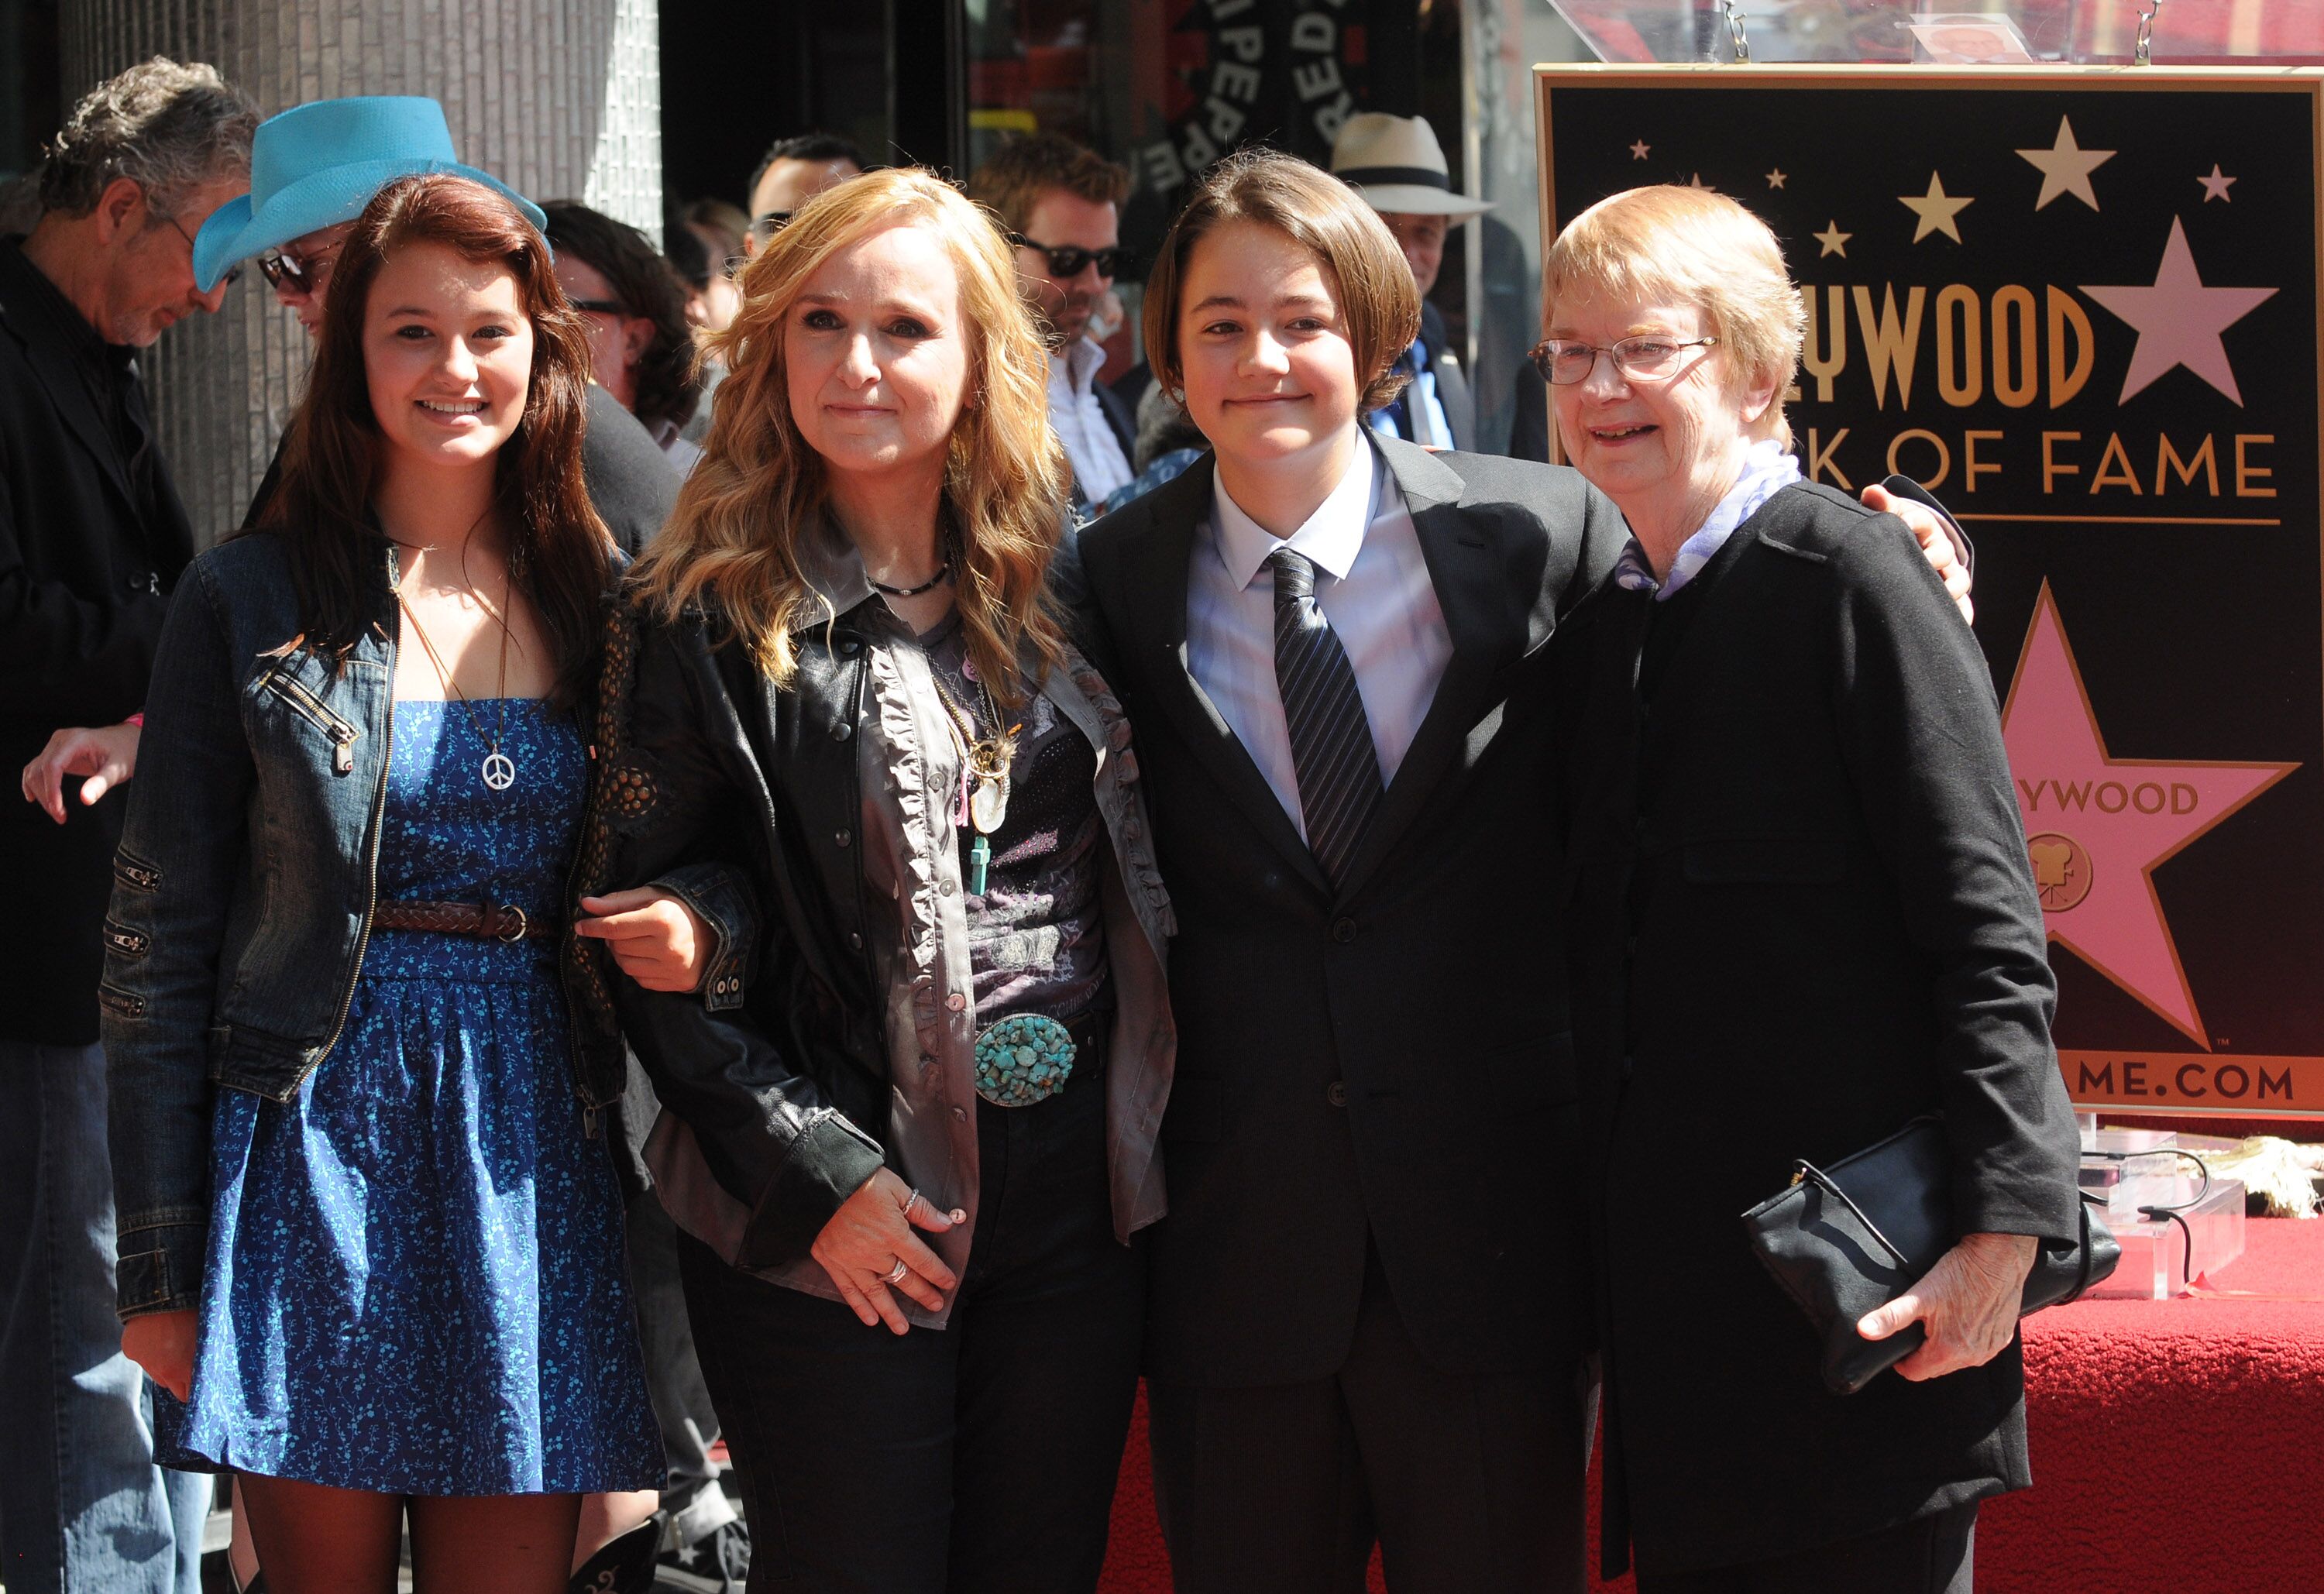 Bailey Cypher, Melissa Etheridge, Beckett Cypher and Elizabeth Williamson attend Melissa Etheridge's Hollywood Walk of Fame Induction Ceremony on September 27, 2011 in Hollywood, California. | Source: Getty Images